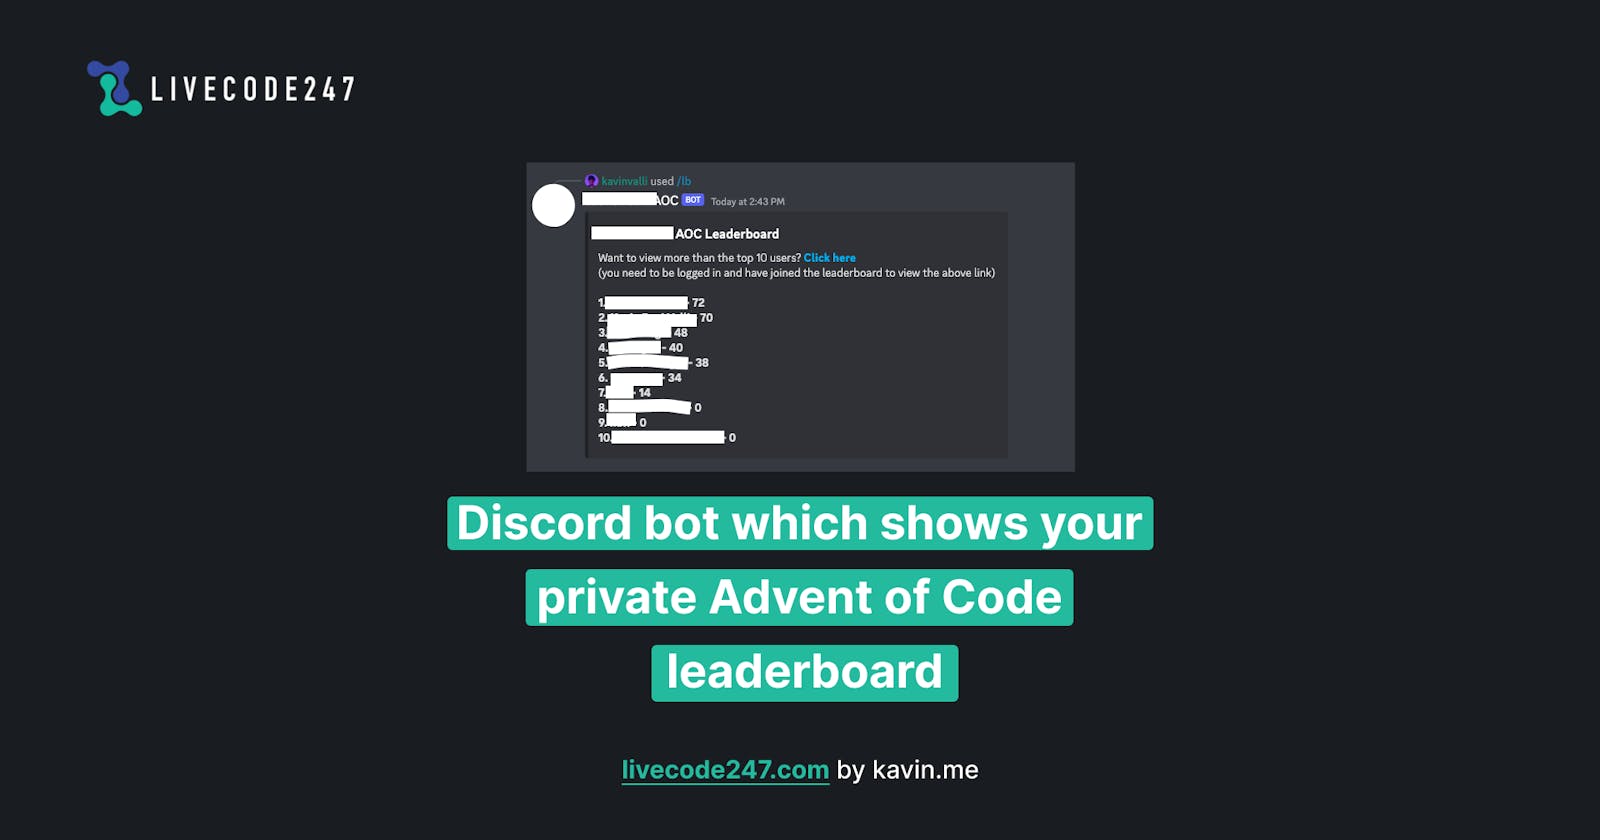 Discord bot which shows your private Advent of Code leaderboard